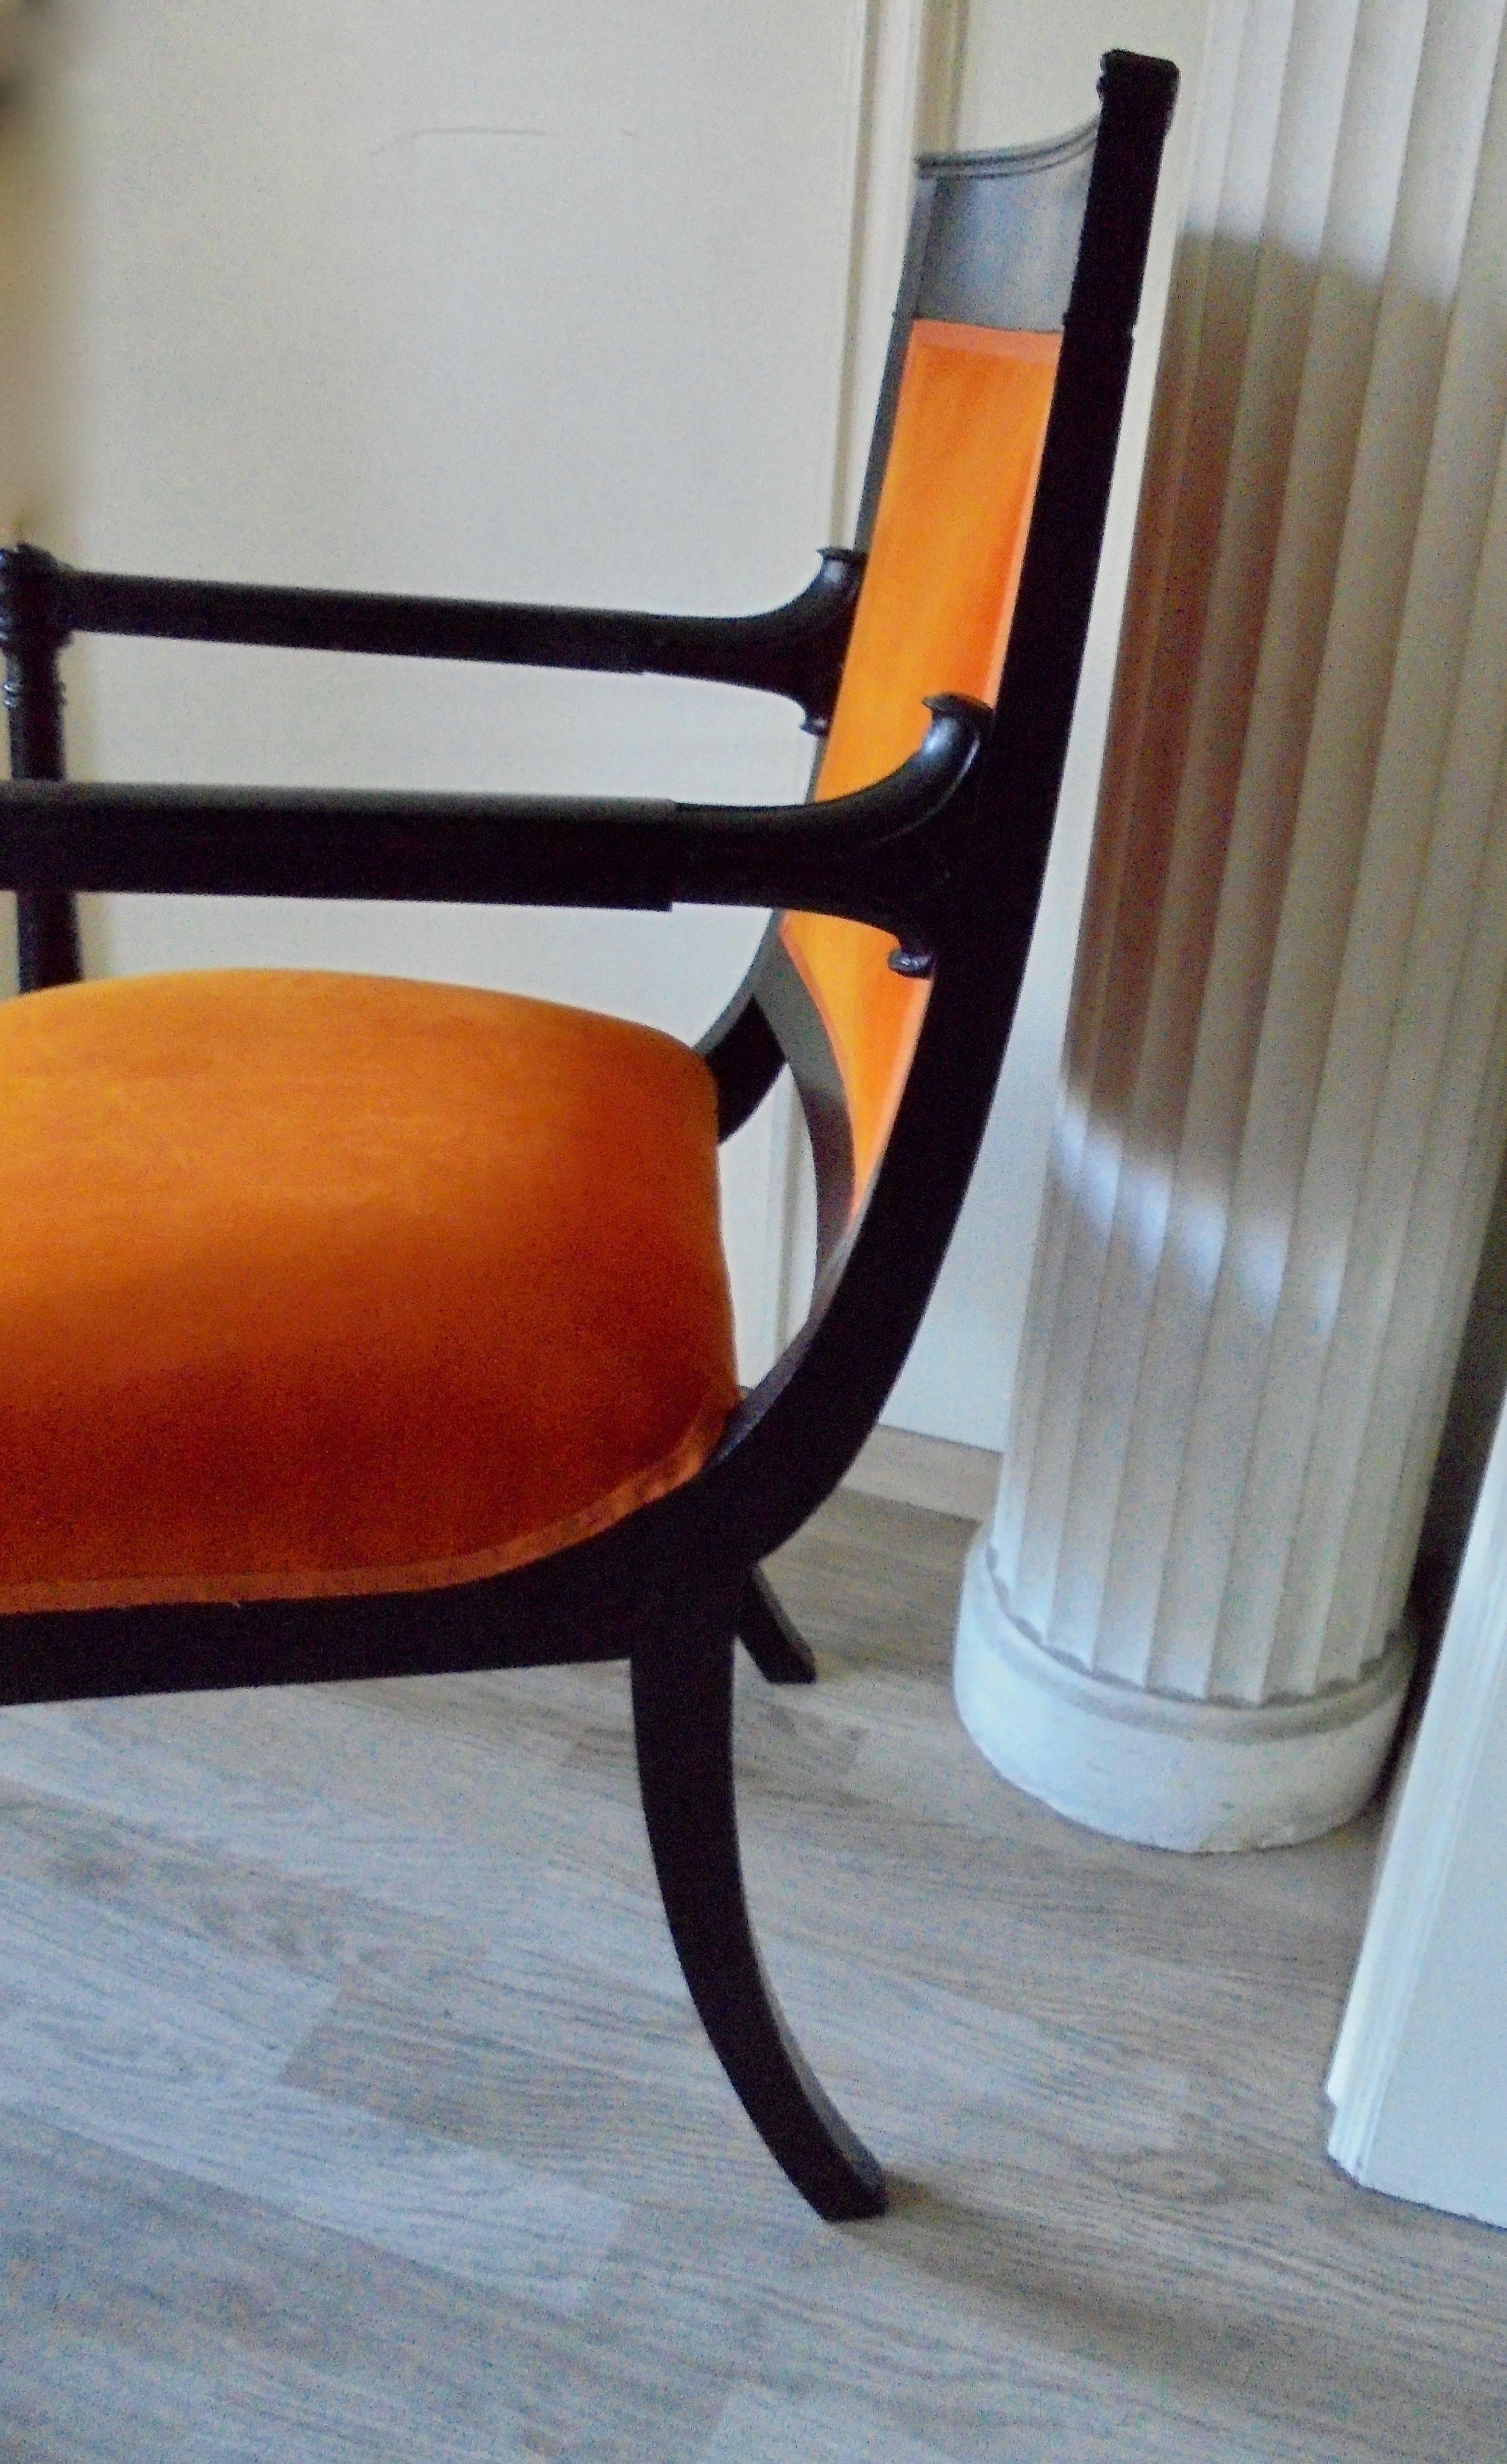 Black lacquer Empire armchair newly covered with " Hermès orange" velvet.
Circa 1935.
